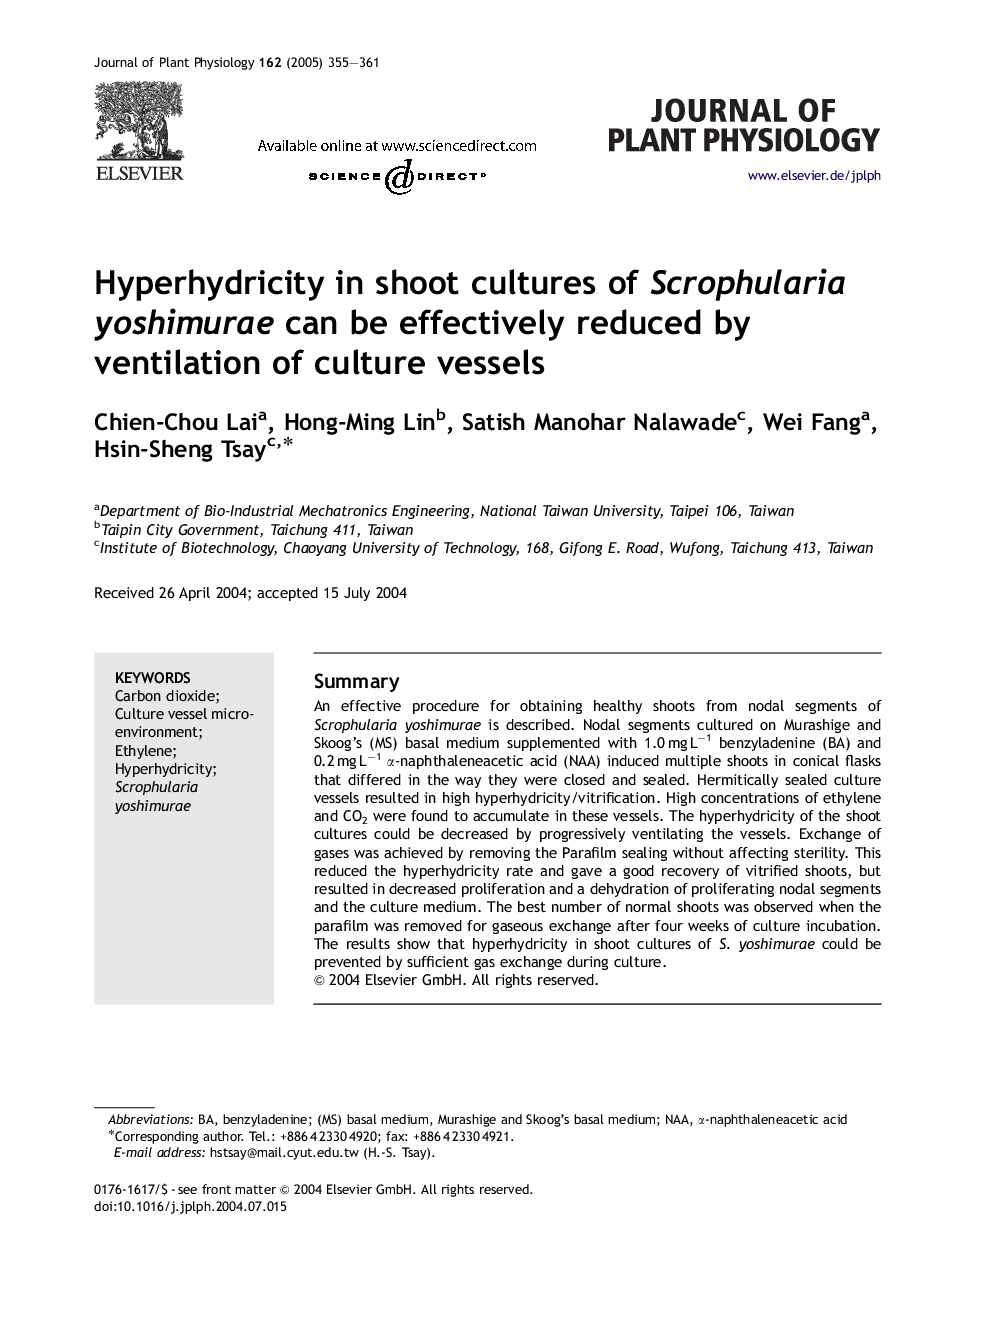 Hyperhydricity in shoot cultures of Scrophularia yoshimurae can be effectively reduced by ventilation of culture vessels